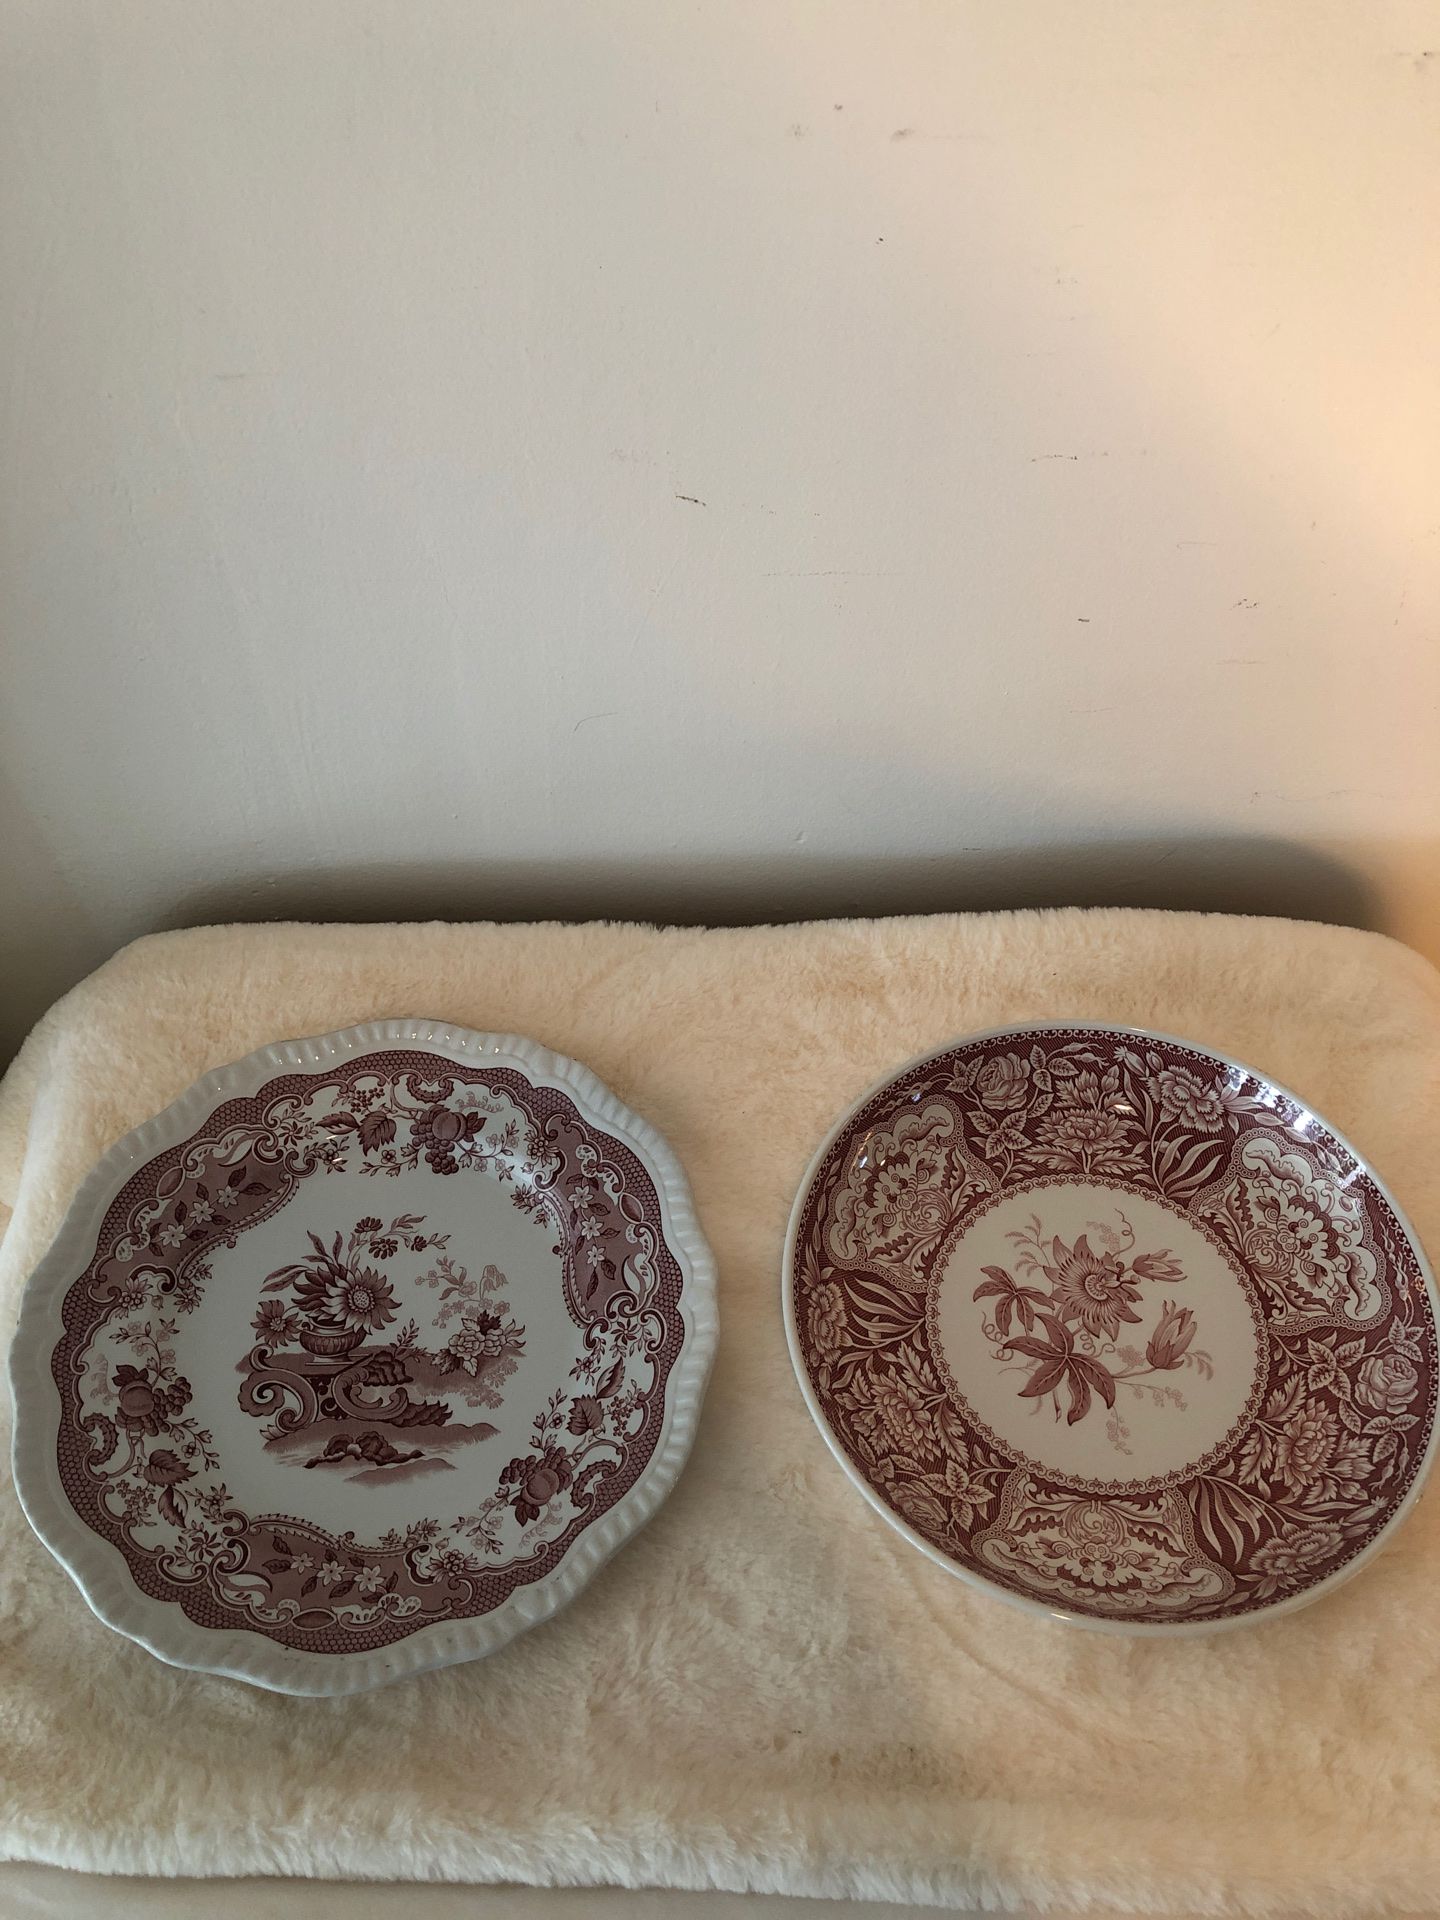 Spode archive collection cake plate 10 1/2 inches and bowl 10 inch